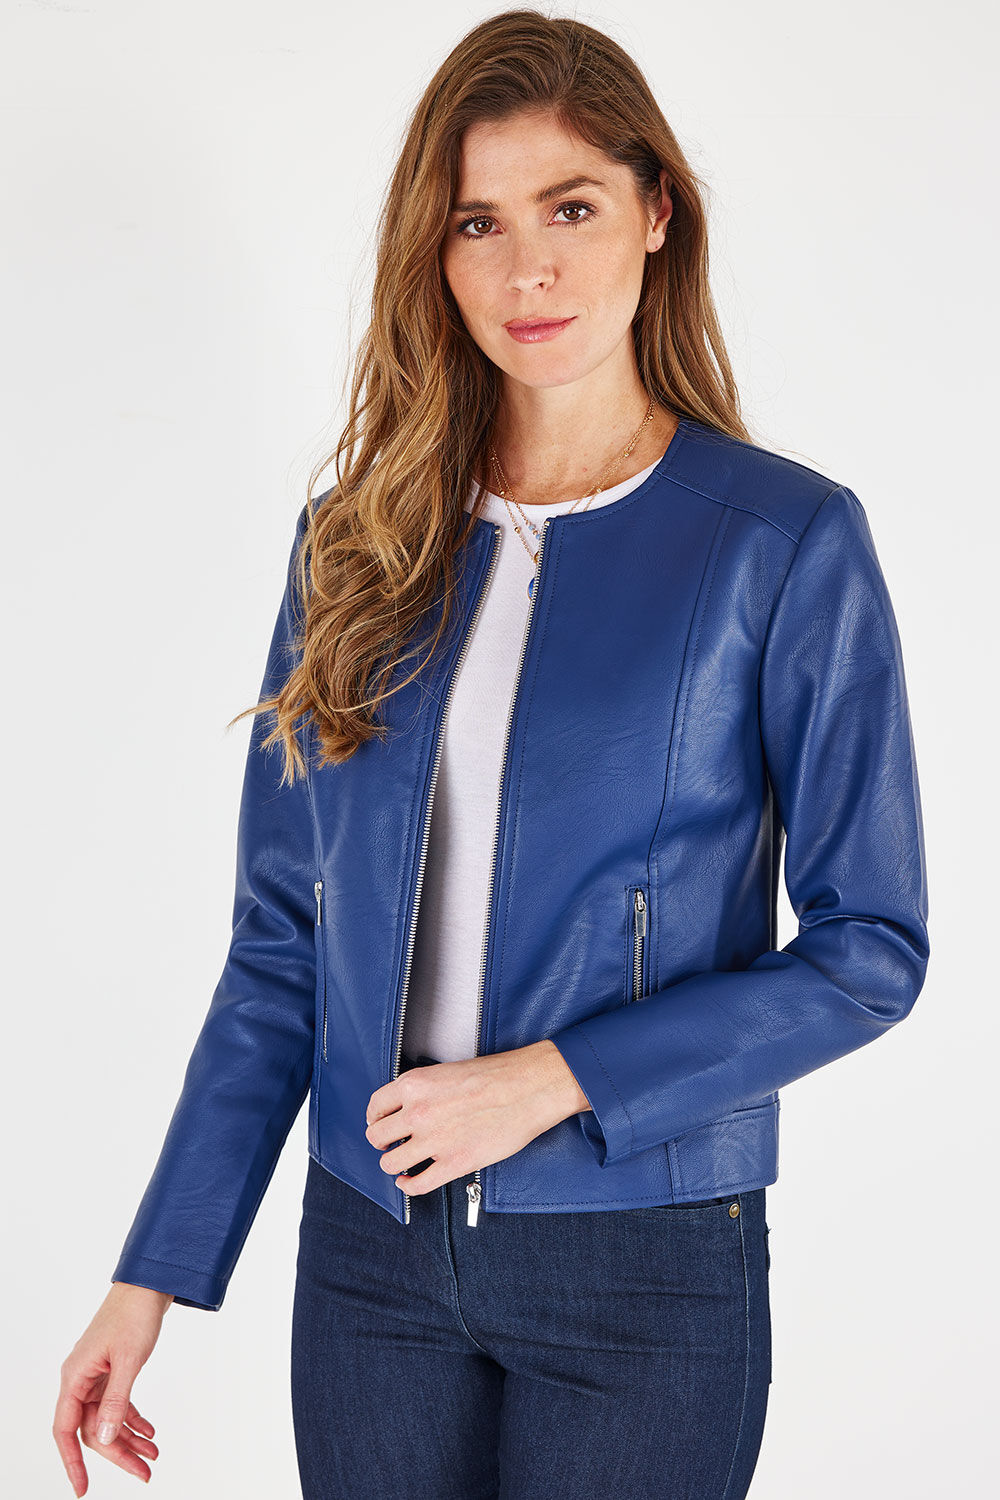 Bonmarche Navy Faux Leather Collarless Jacket, Size: 16